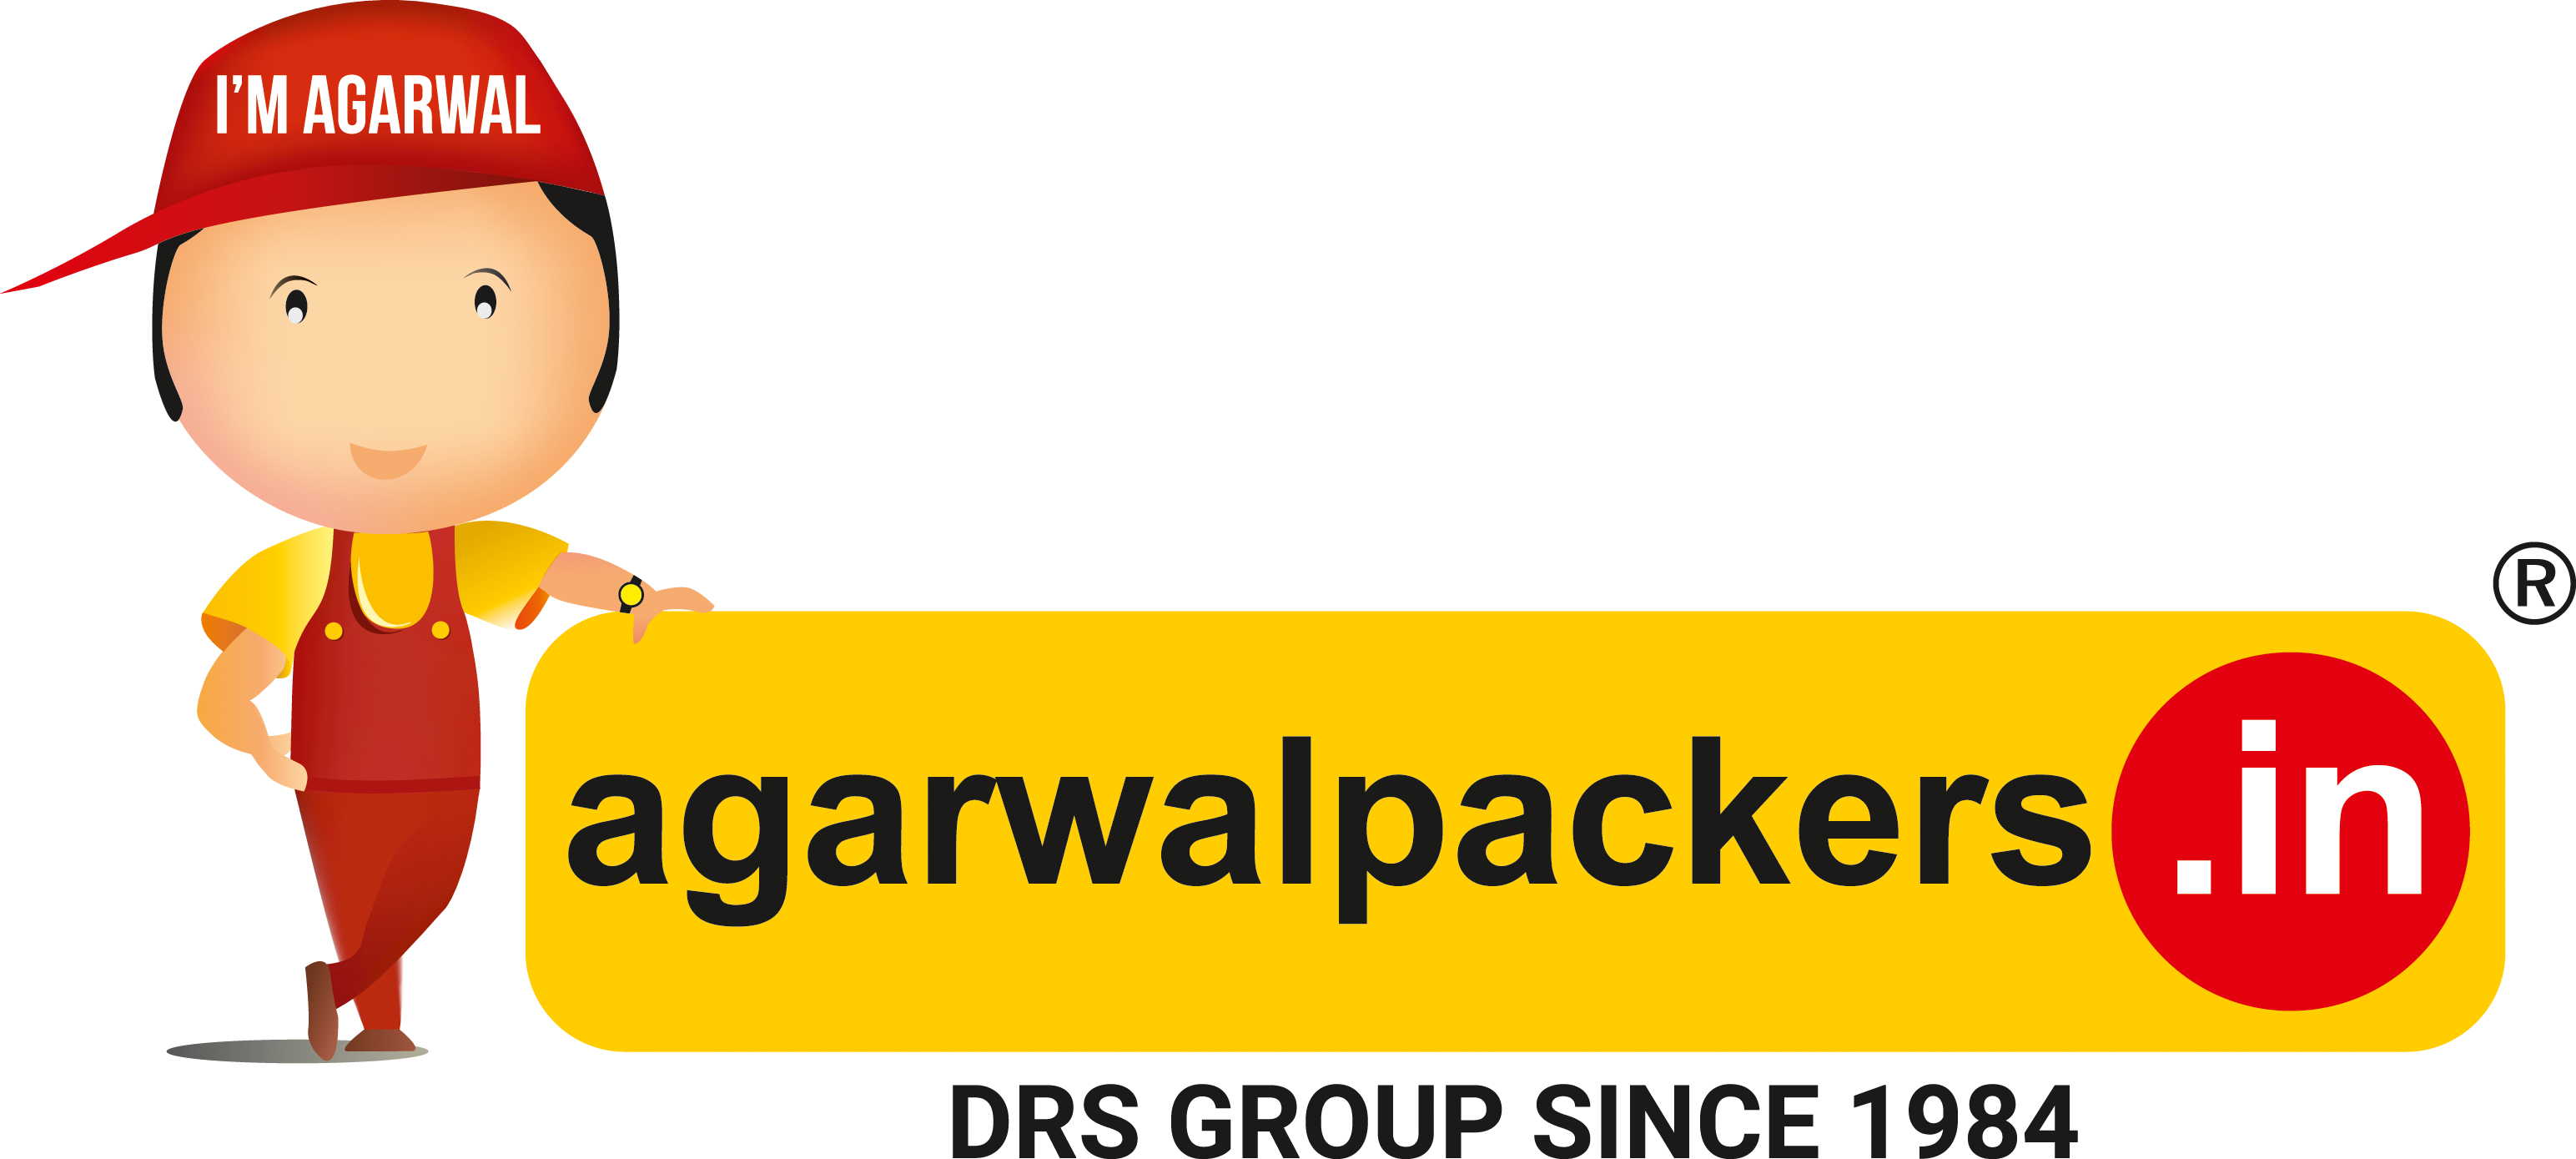 Agarwal Packers And Movers Drs Reviews Careers Jobs Salary